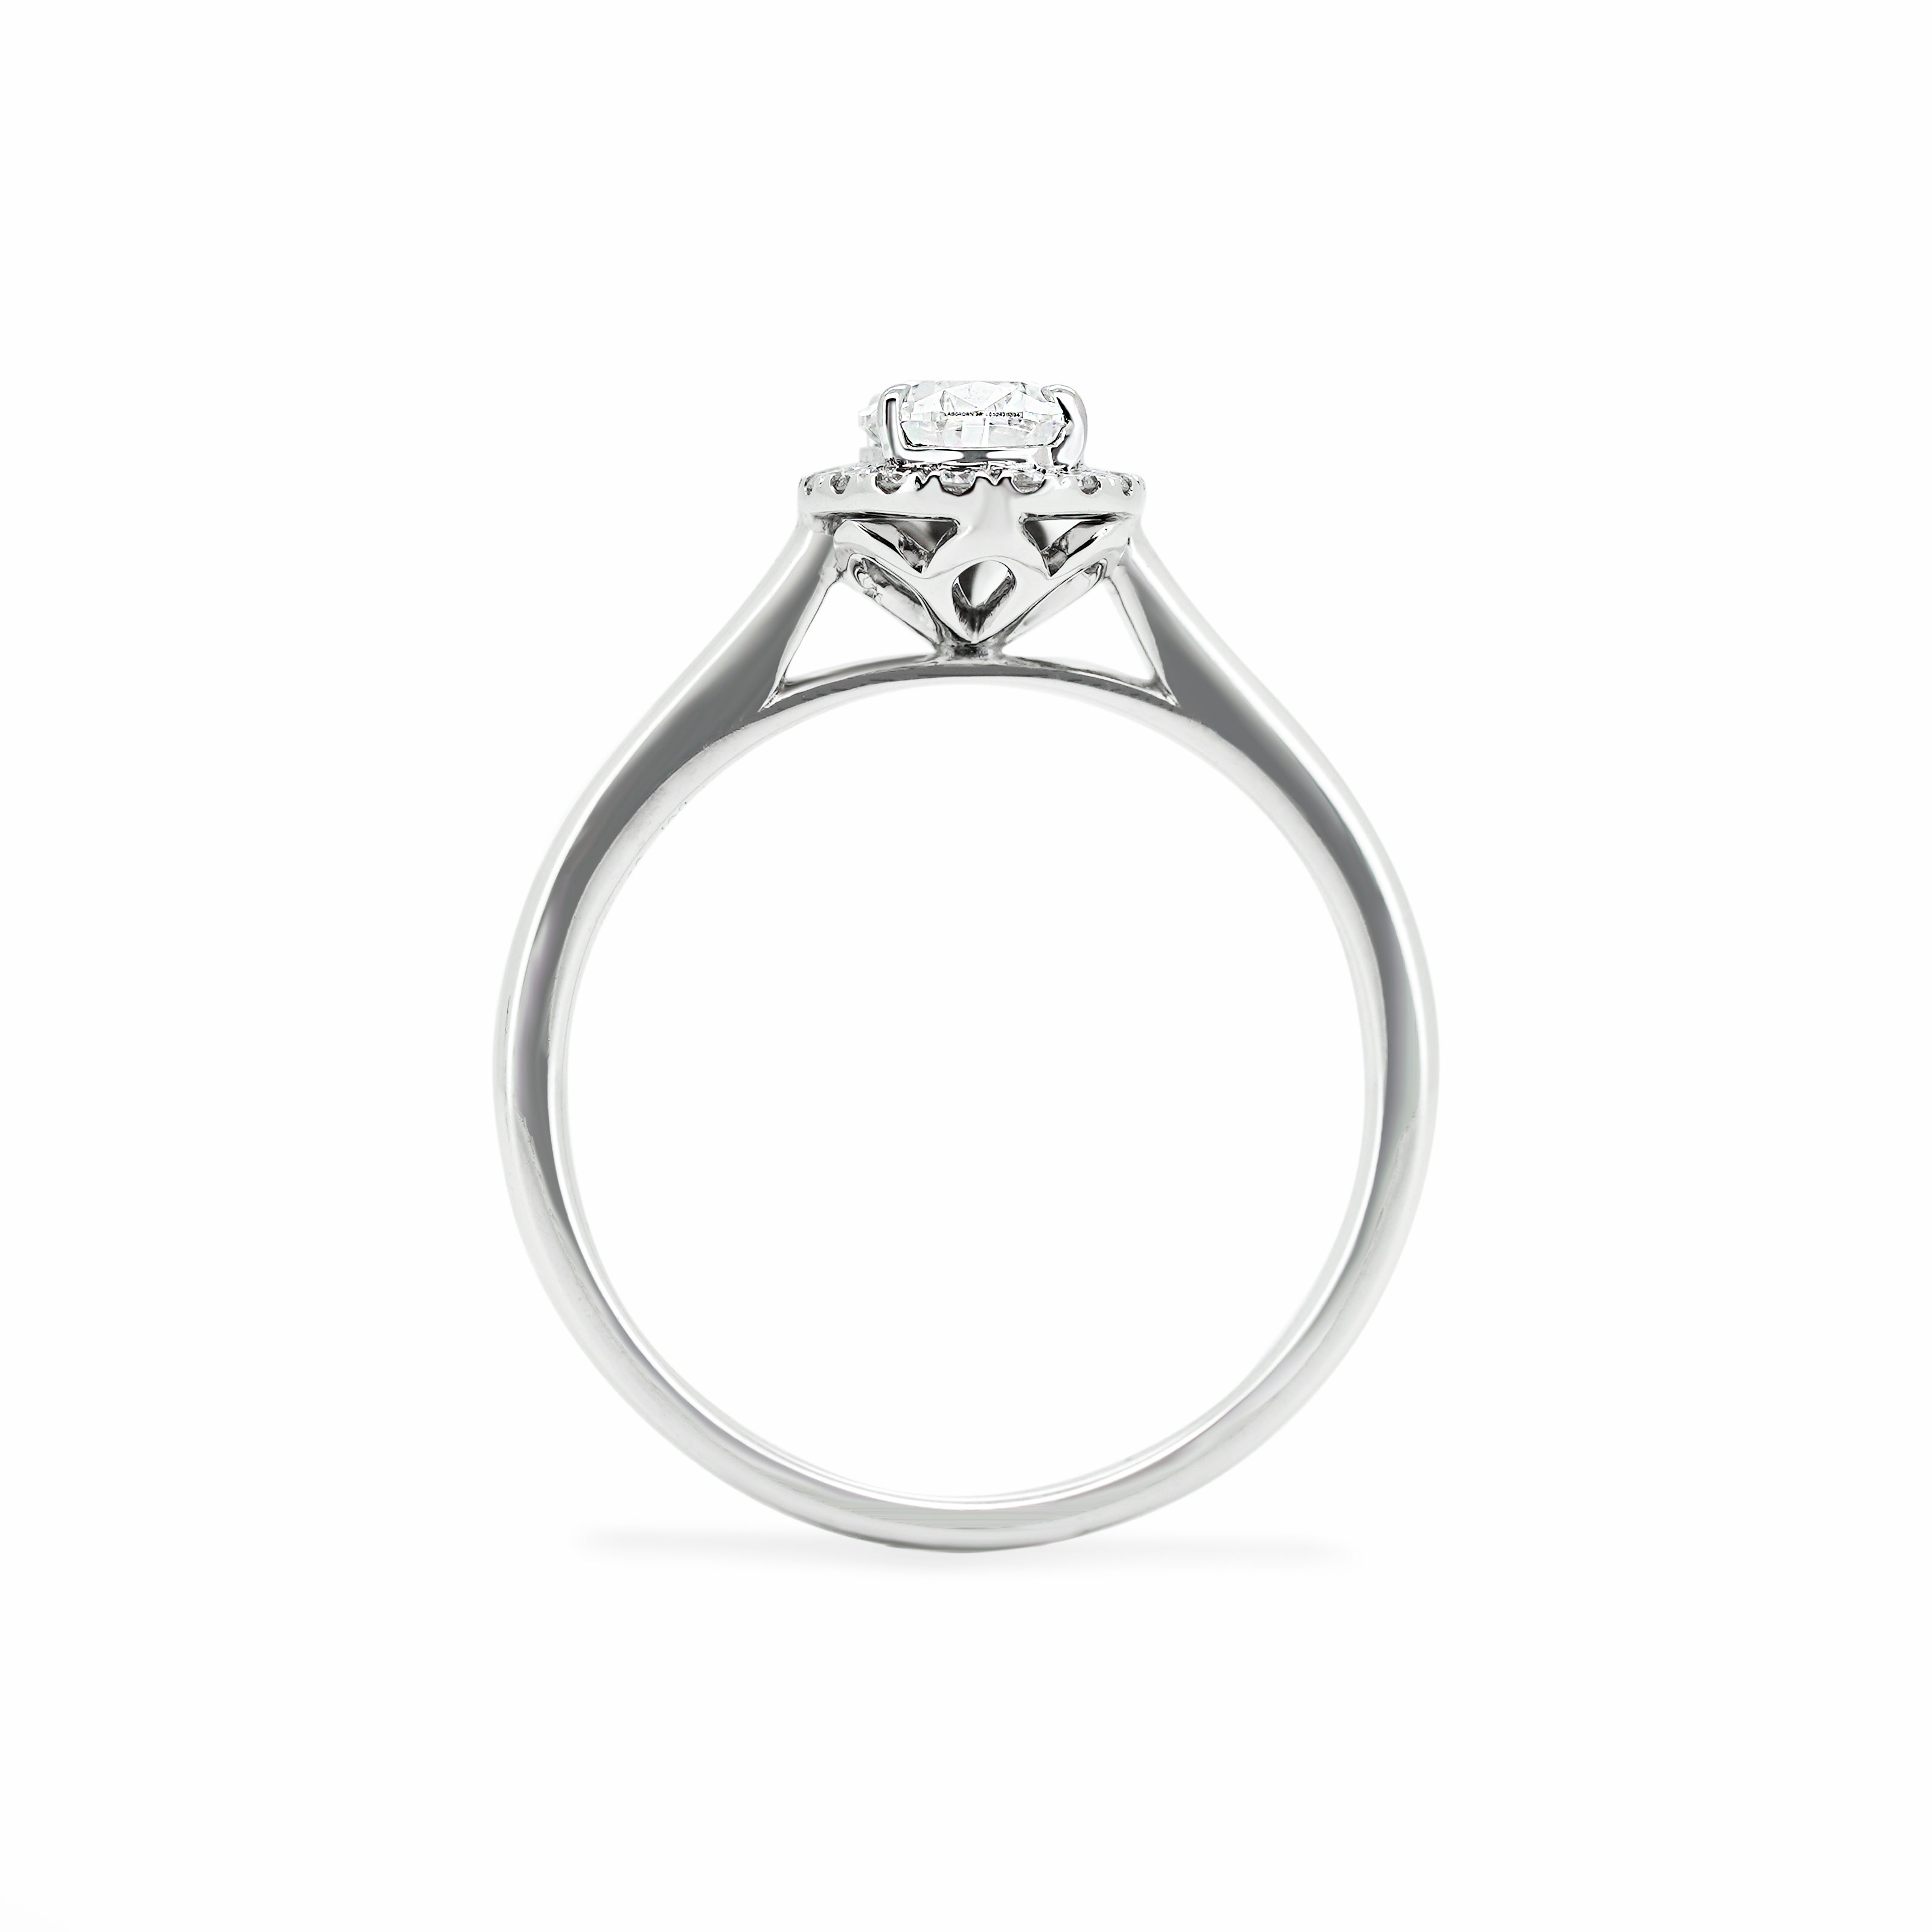 Pear Diamond Ring with Halo | Sol et Terre